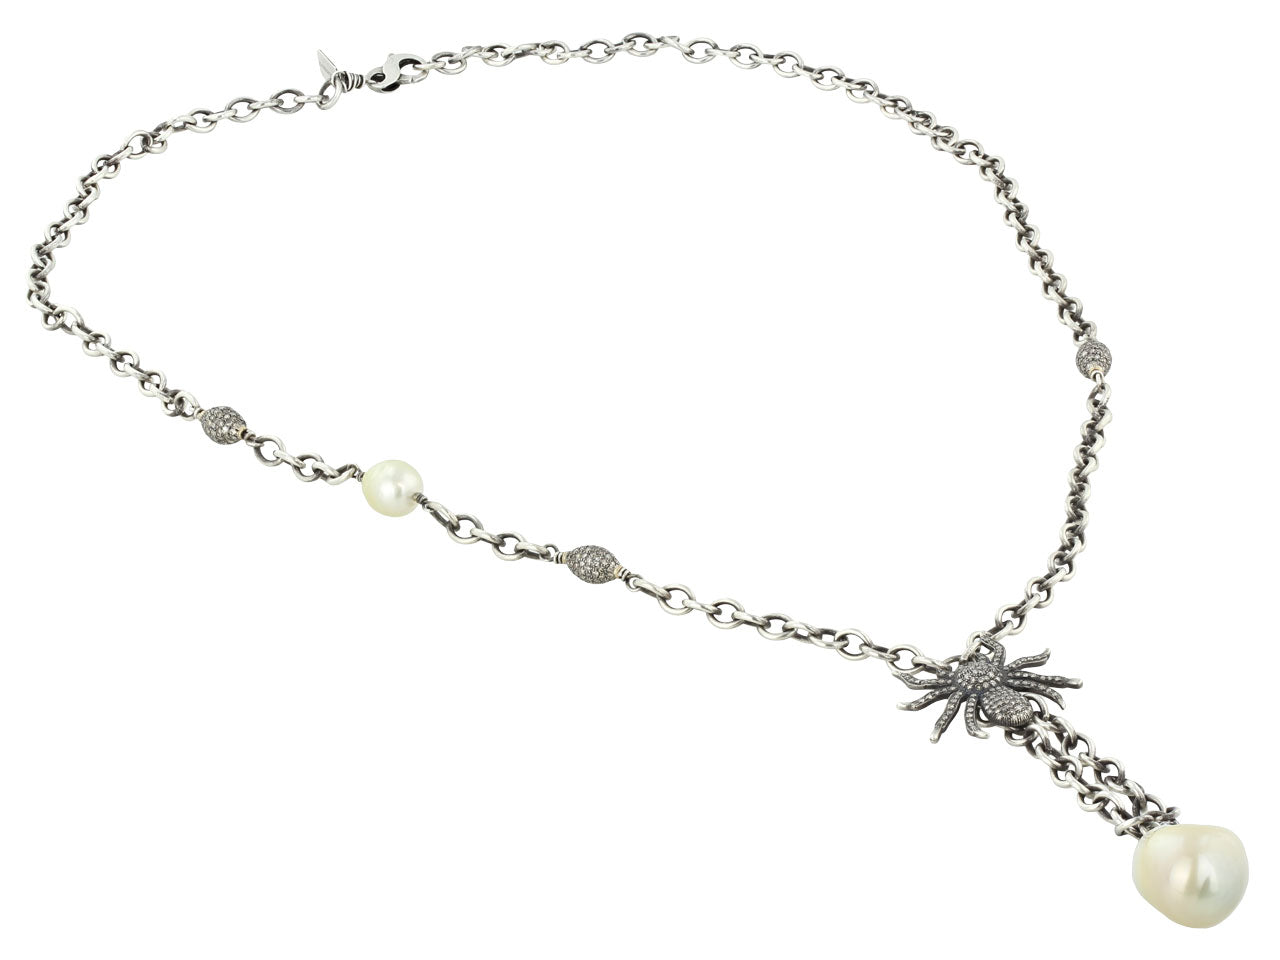 Irit Design Pearl and Diamond Necklace in Sterling Silver